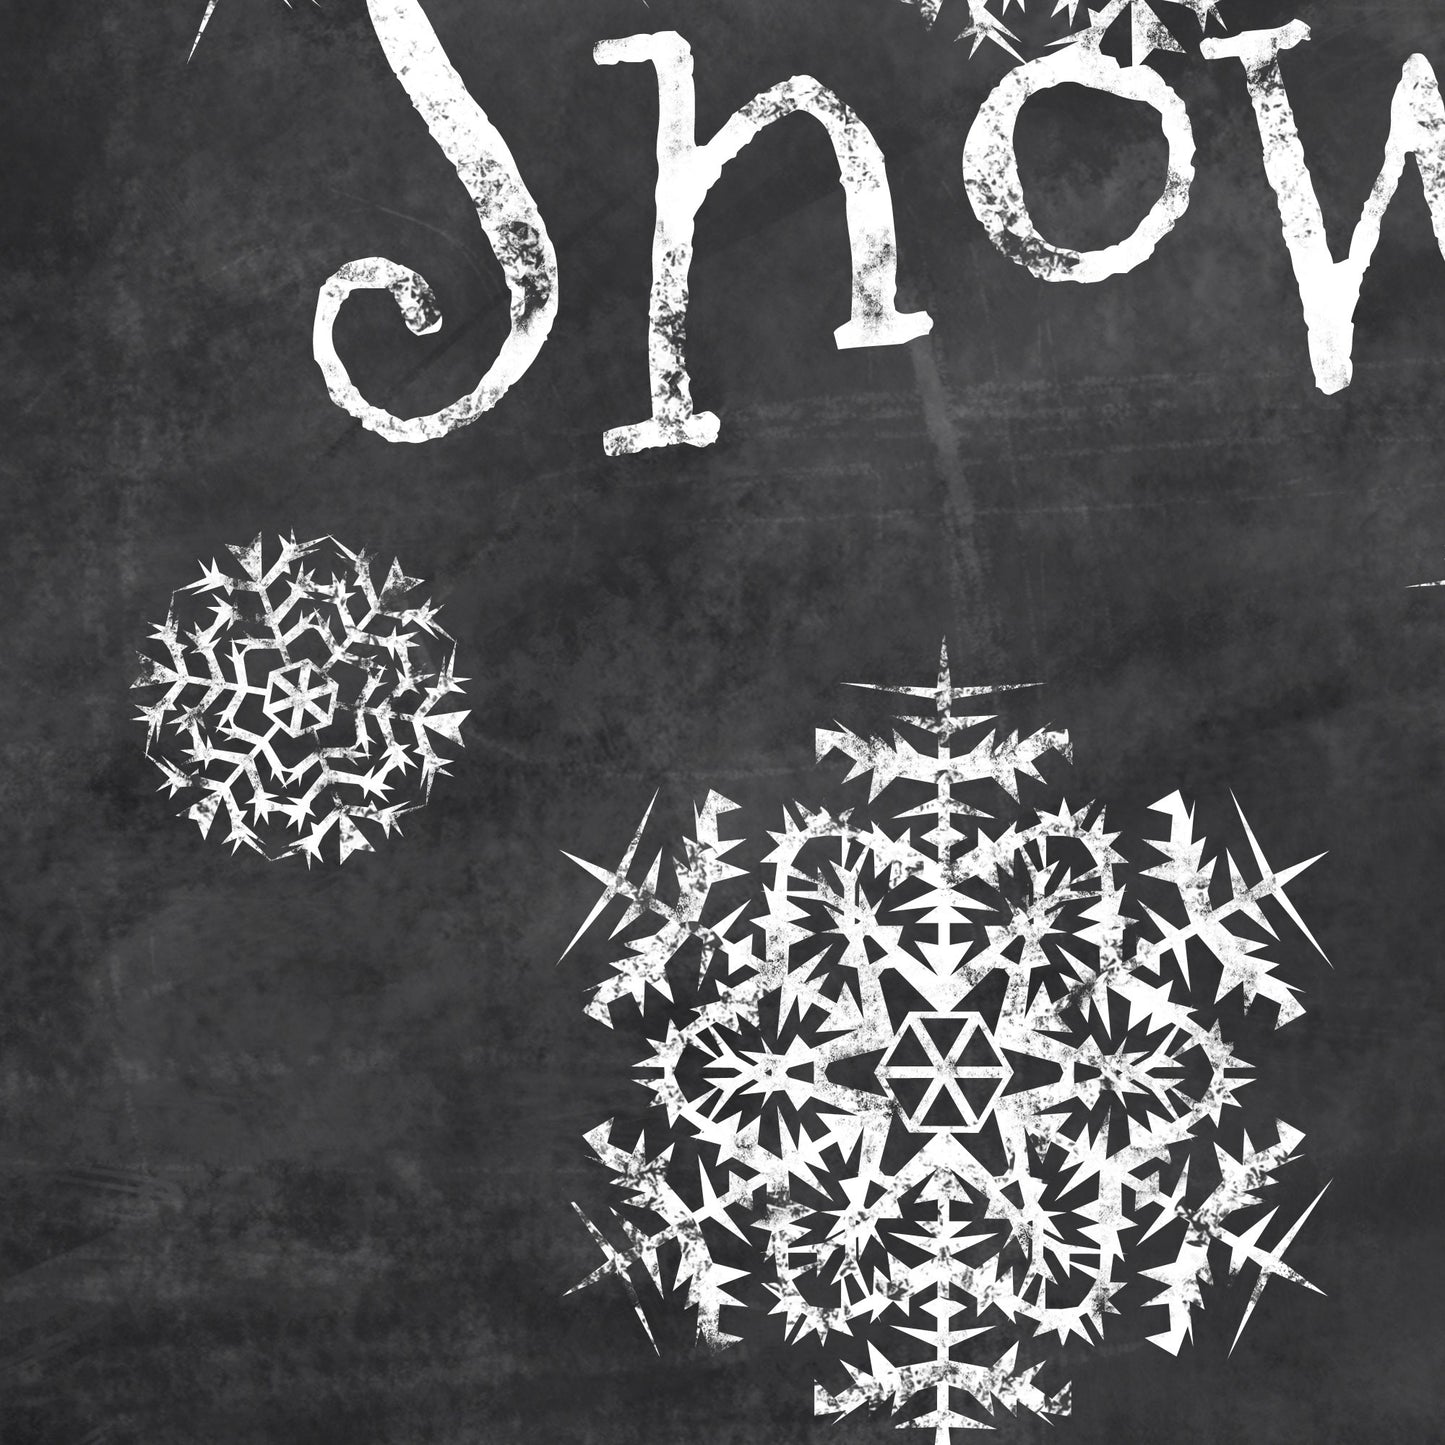 Distressed Snow Chalkboard Up Close Details